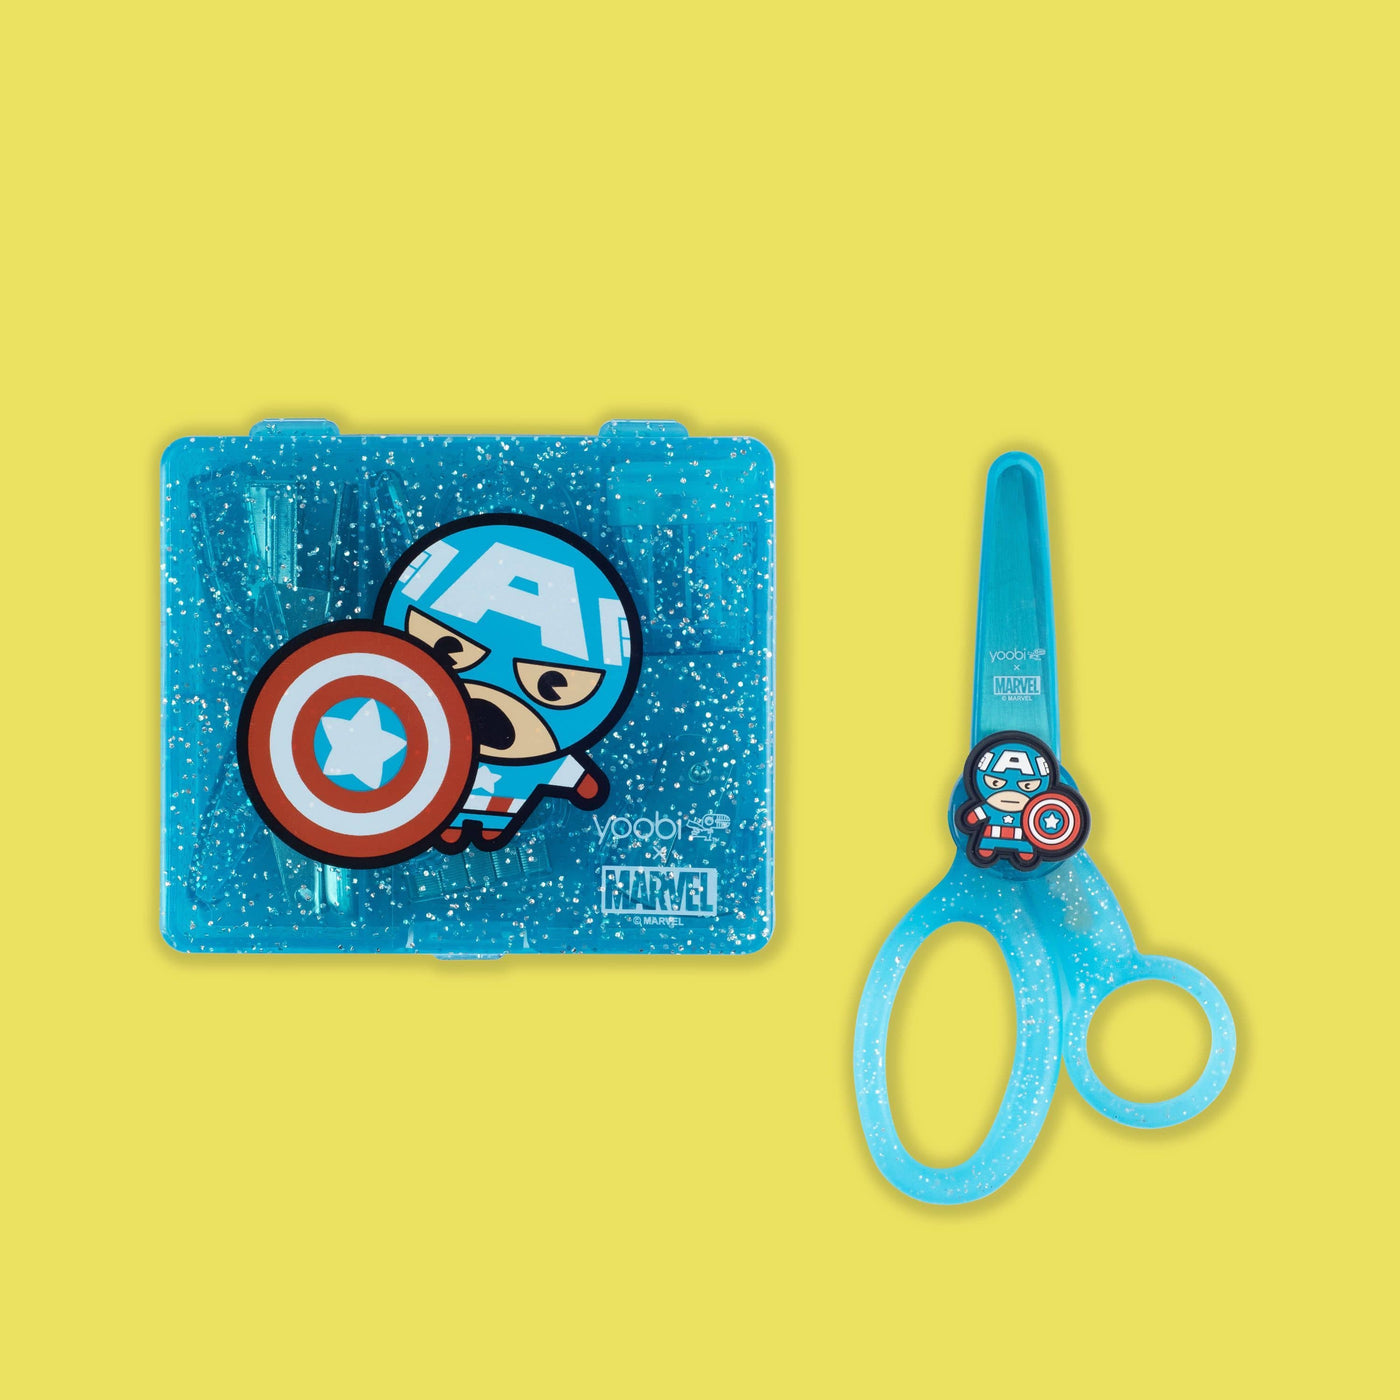 Captain America mini supply kit and Scissors with Captain America cartoon figure on top of case and Captain America charm on front of scissors, blue glitter